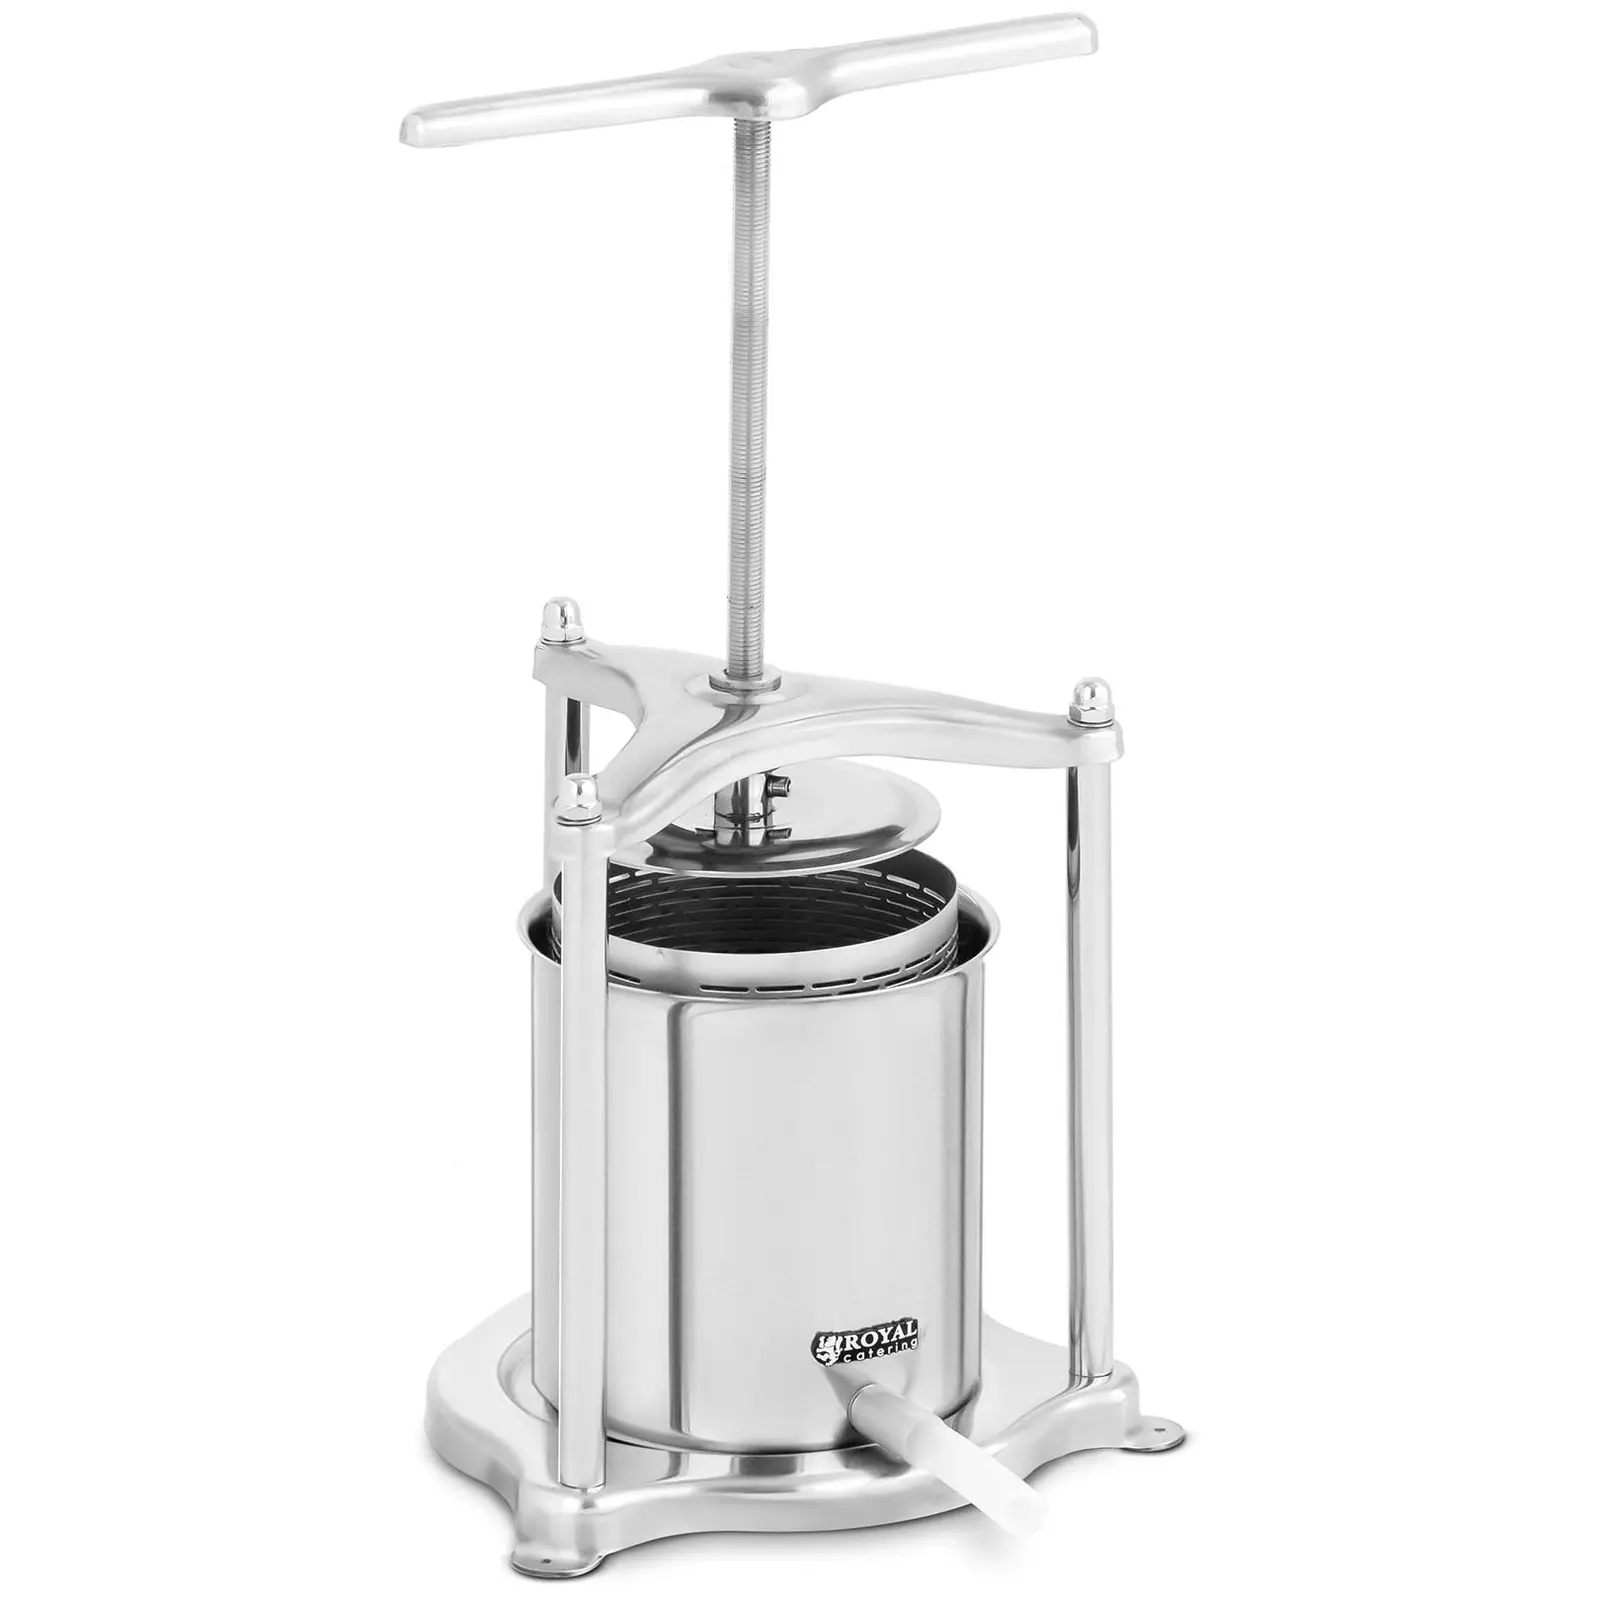 Juice Press - stainless steel - 5 l - incl. 5 muslin cloths - Royal Catering